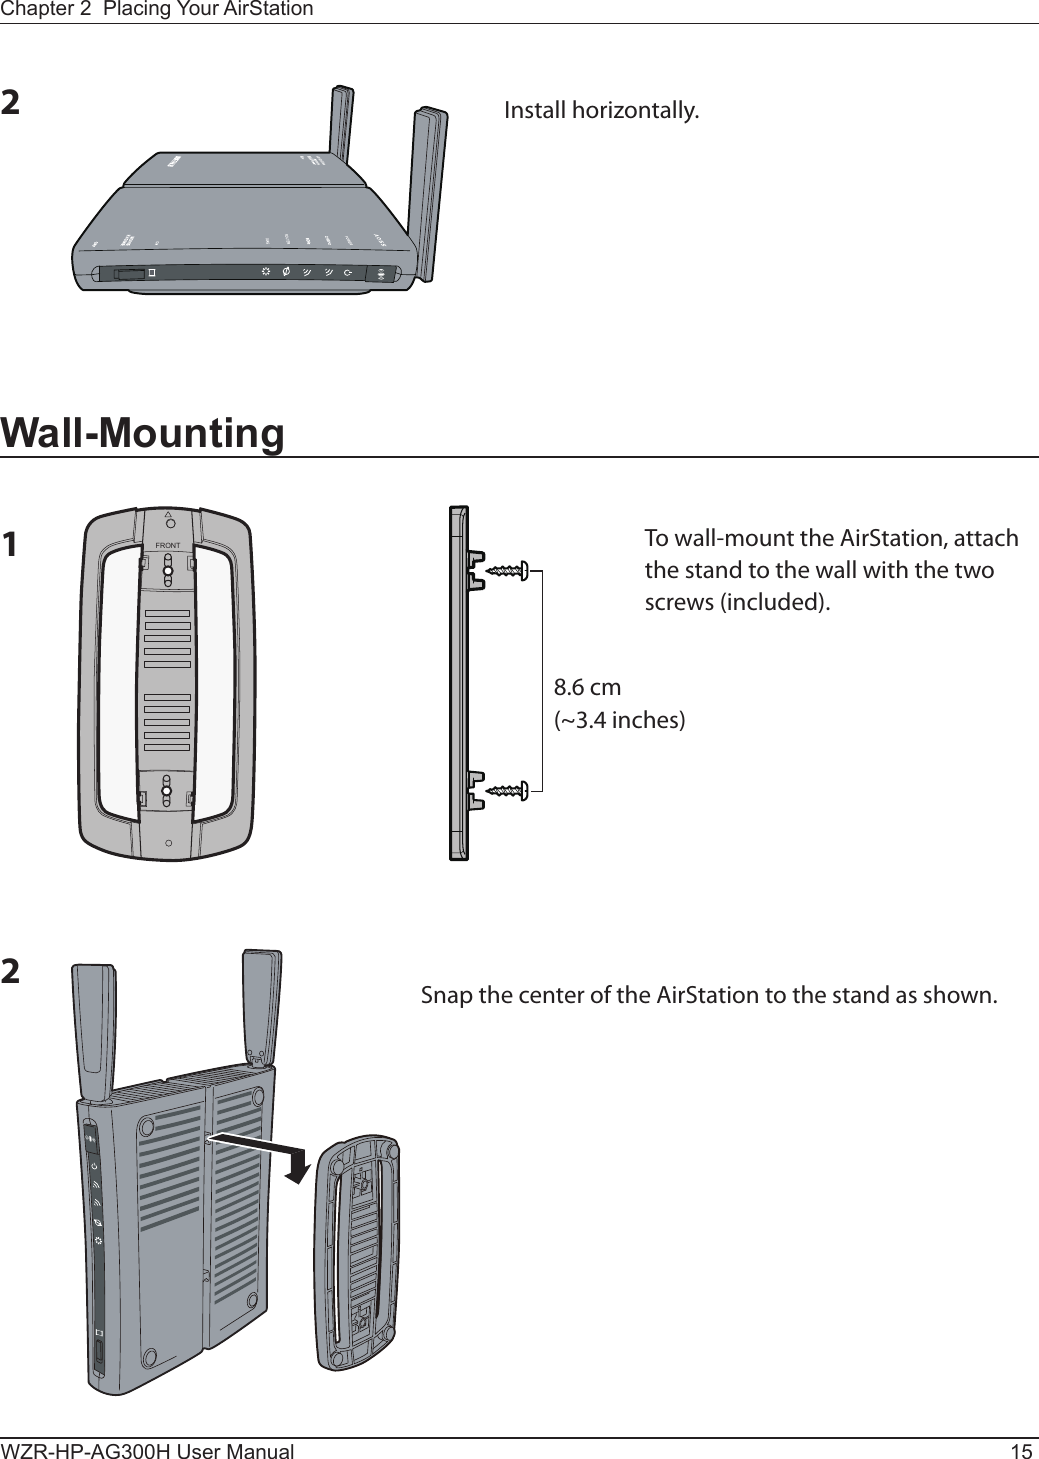 FRONTChapter 2  Placing Your AirStationWZR-HP-AG300H User Manual 152Install horizontally.Wall-Mounting1To wall-mount the AirStation, attach the stand to the wall with the two screws (included).8.6 cm(~3.4 inches)2Snap the center of the AirStation to the stand as shown.